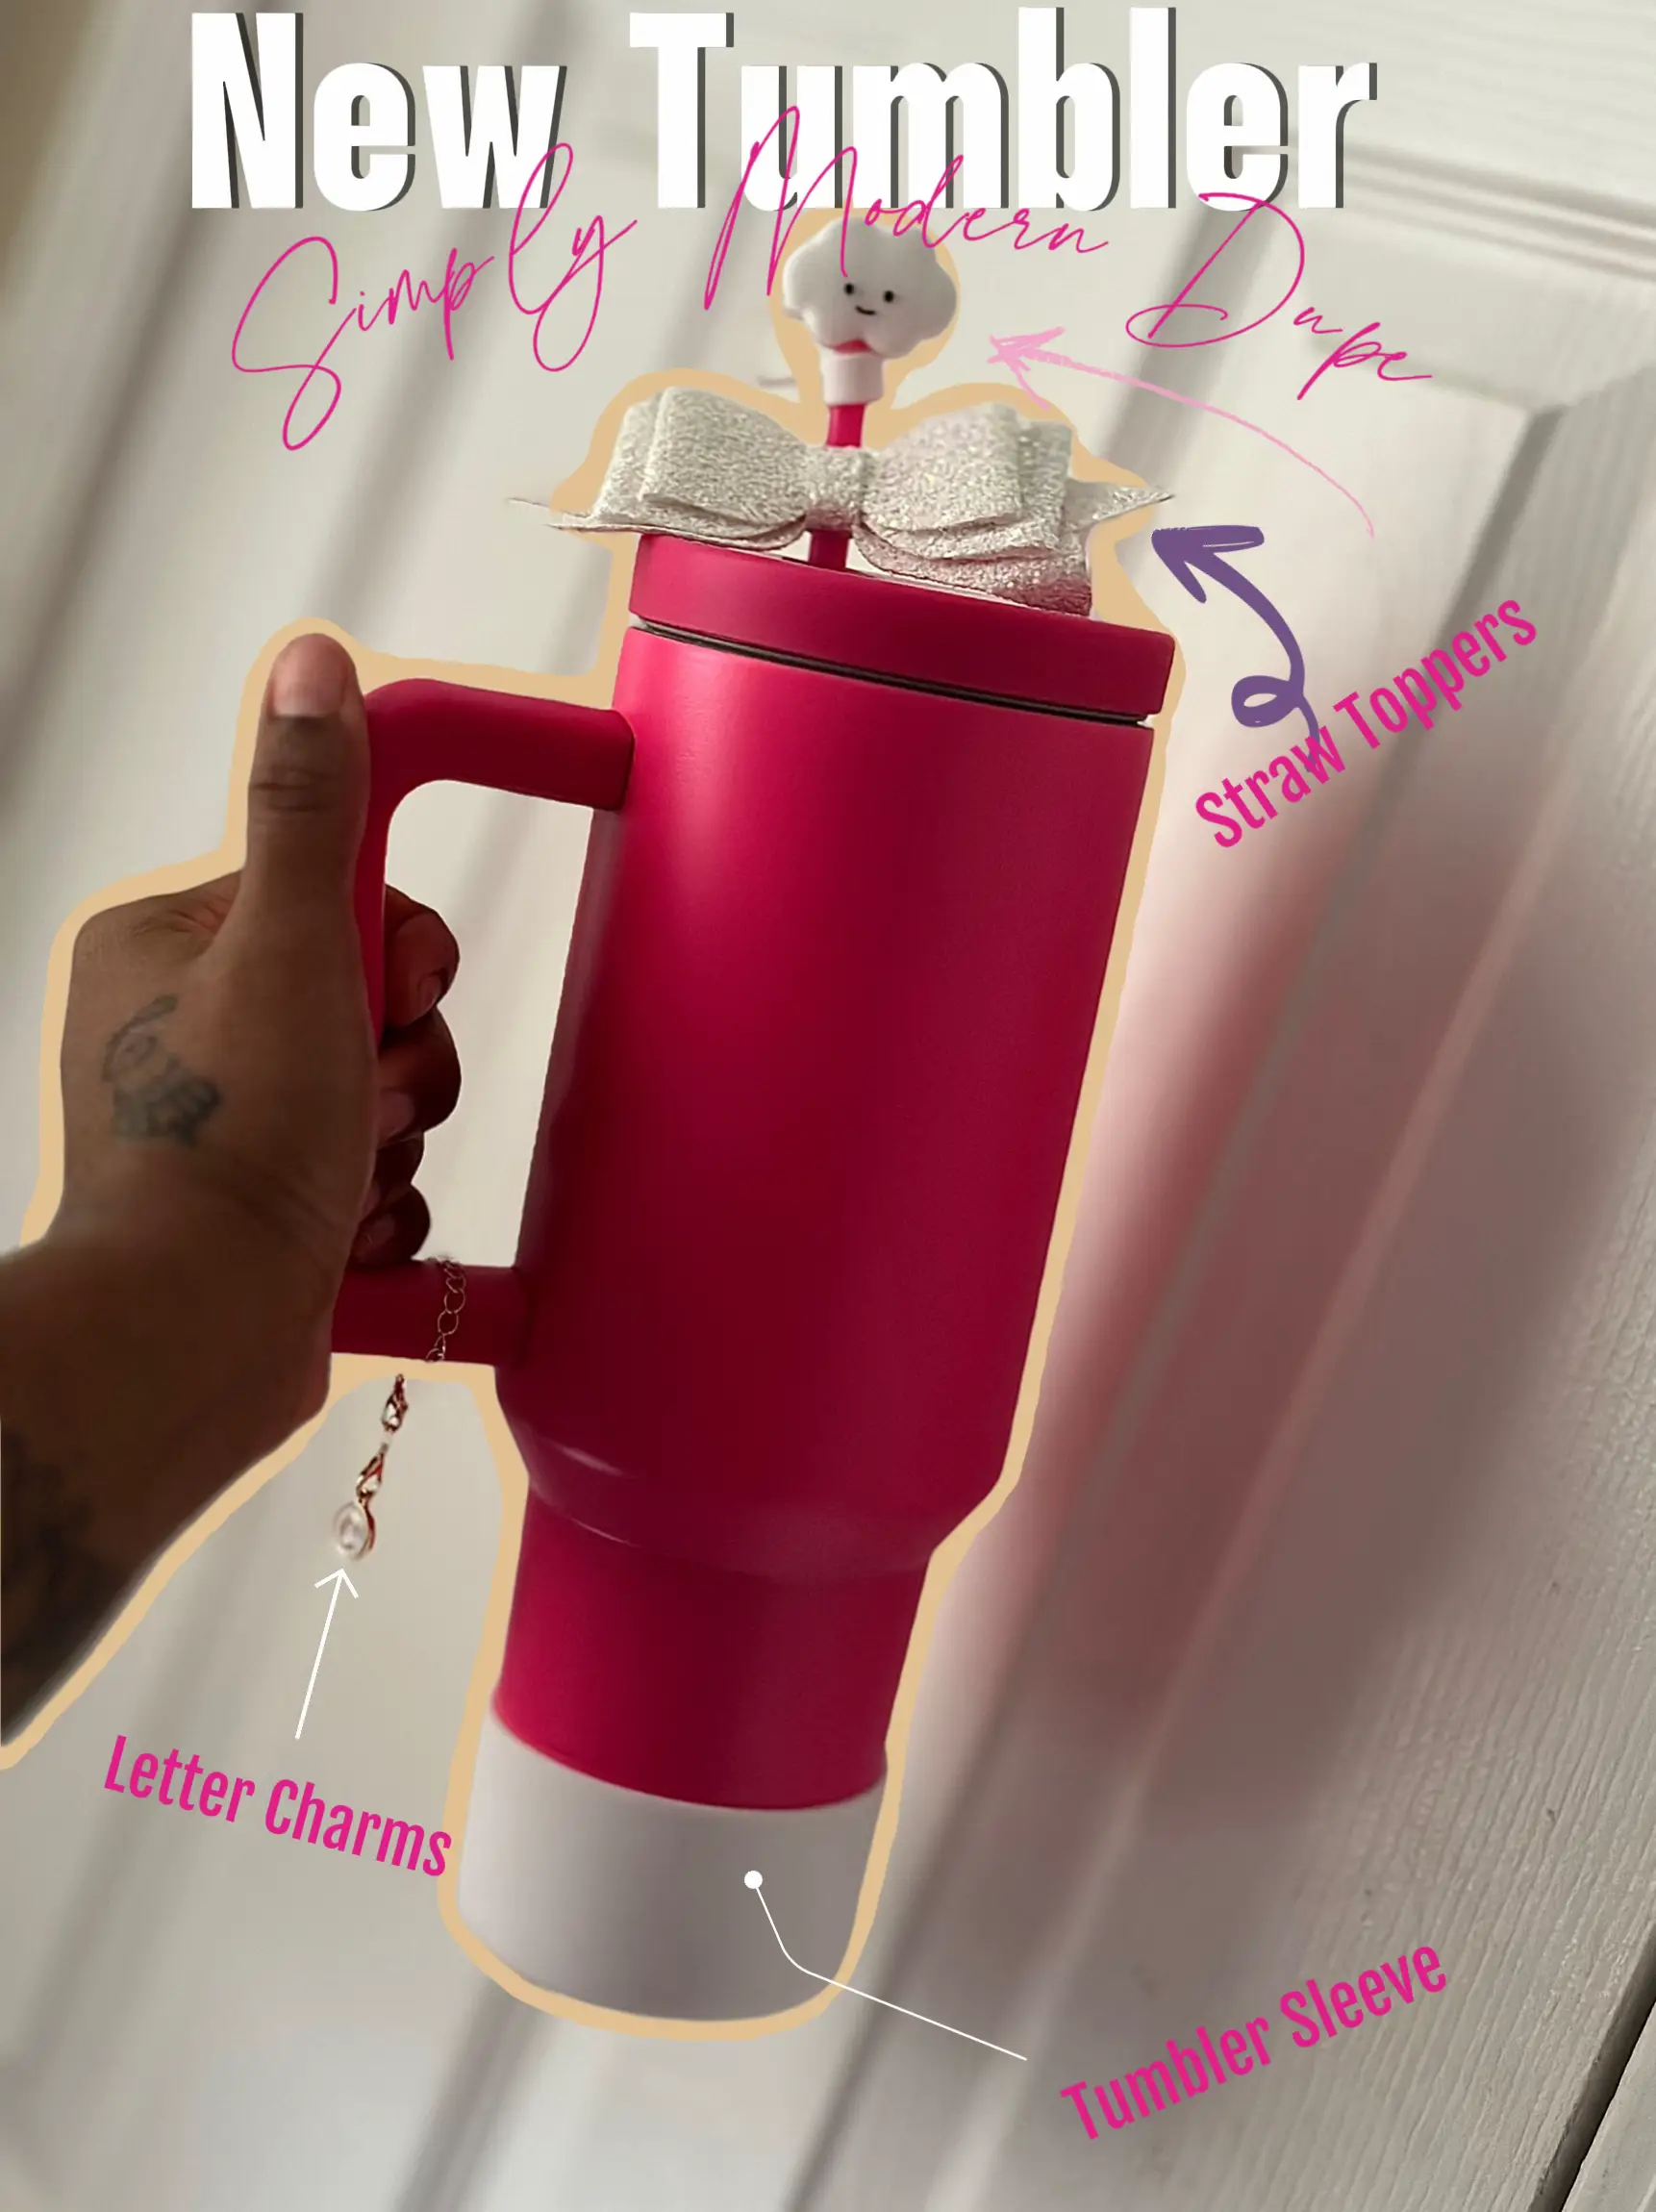 Initial Letter Charm for your new Pink Stanley Tumbler